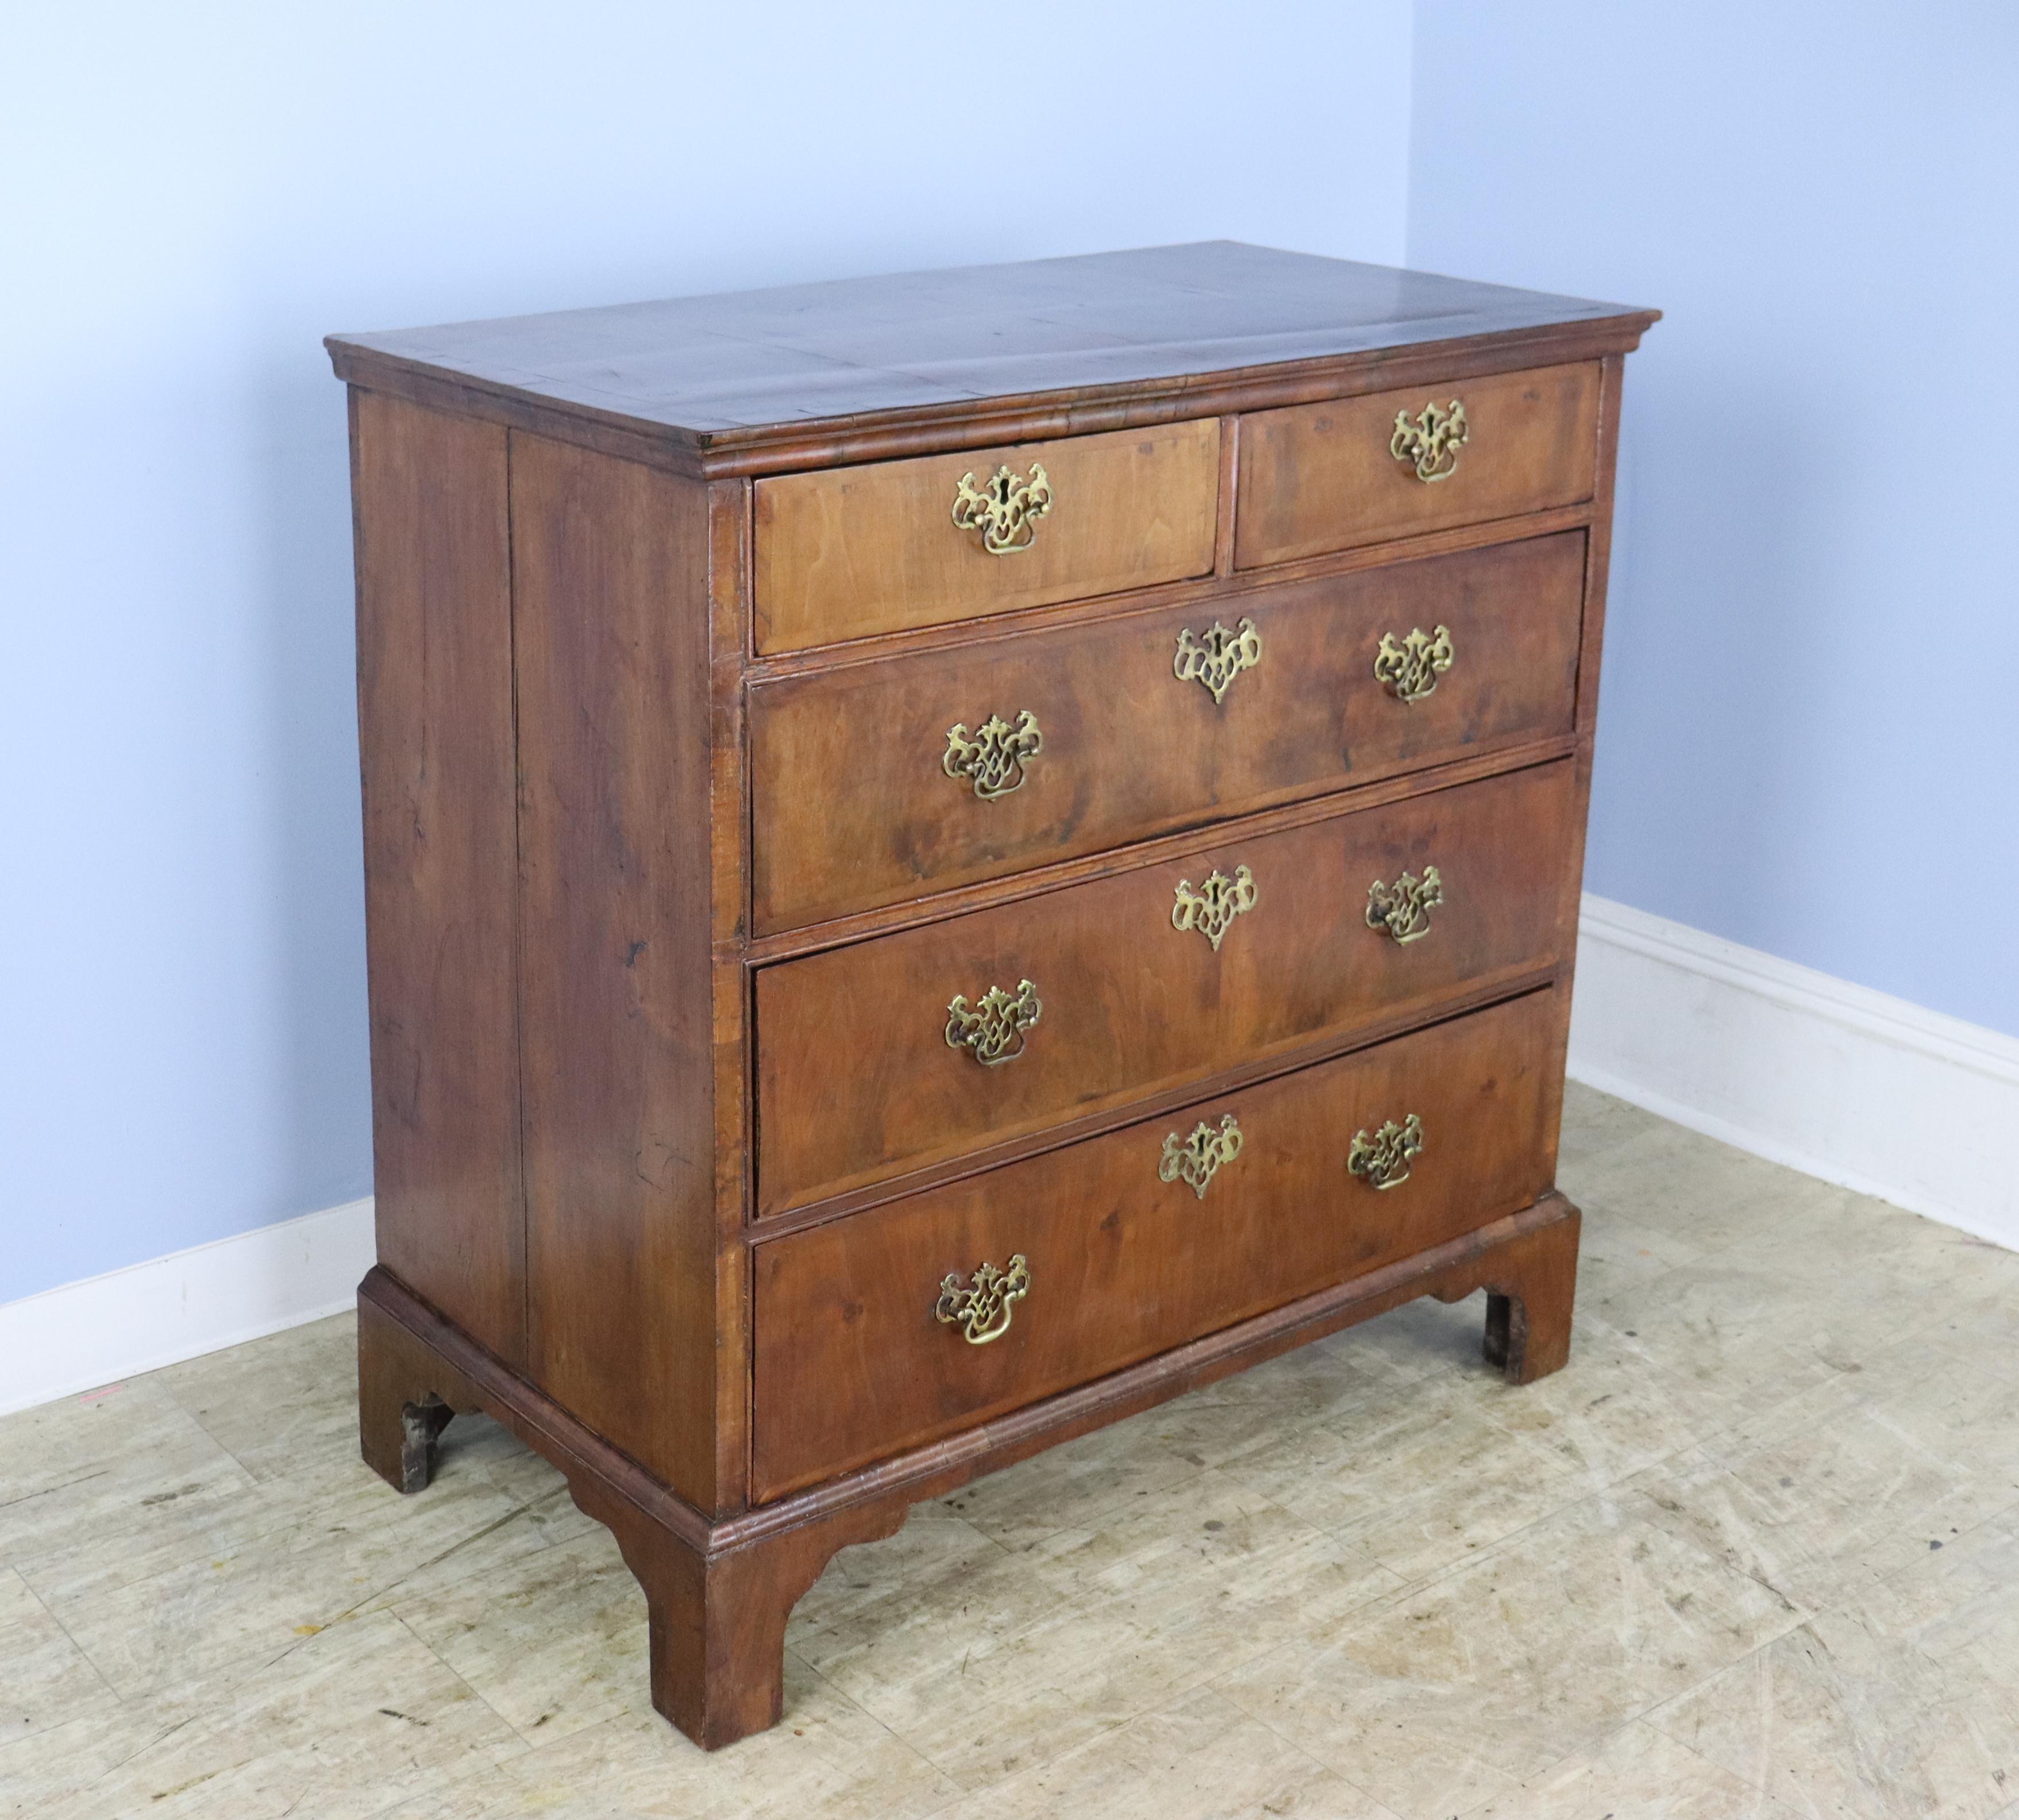 A splendid early burr walnut veneered chest with original brasses and period ogee feet.  The veneer has good patina and shine and some age appropriate wear, notably on the top, shown in thumbnails.  Classic 2 over 3 construction with nice mouldings